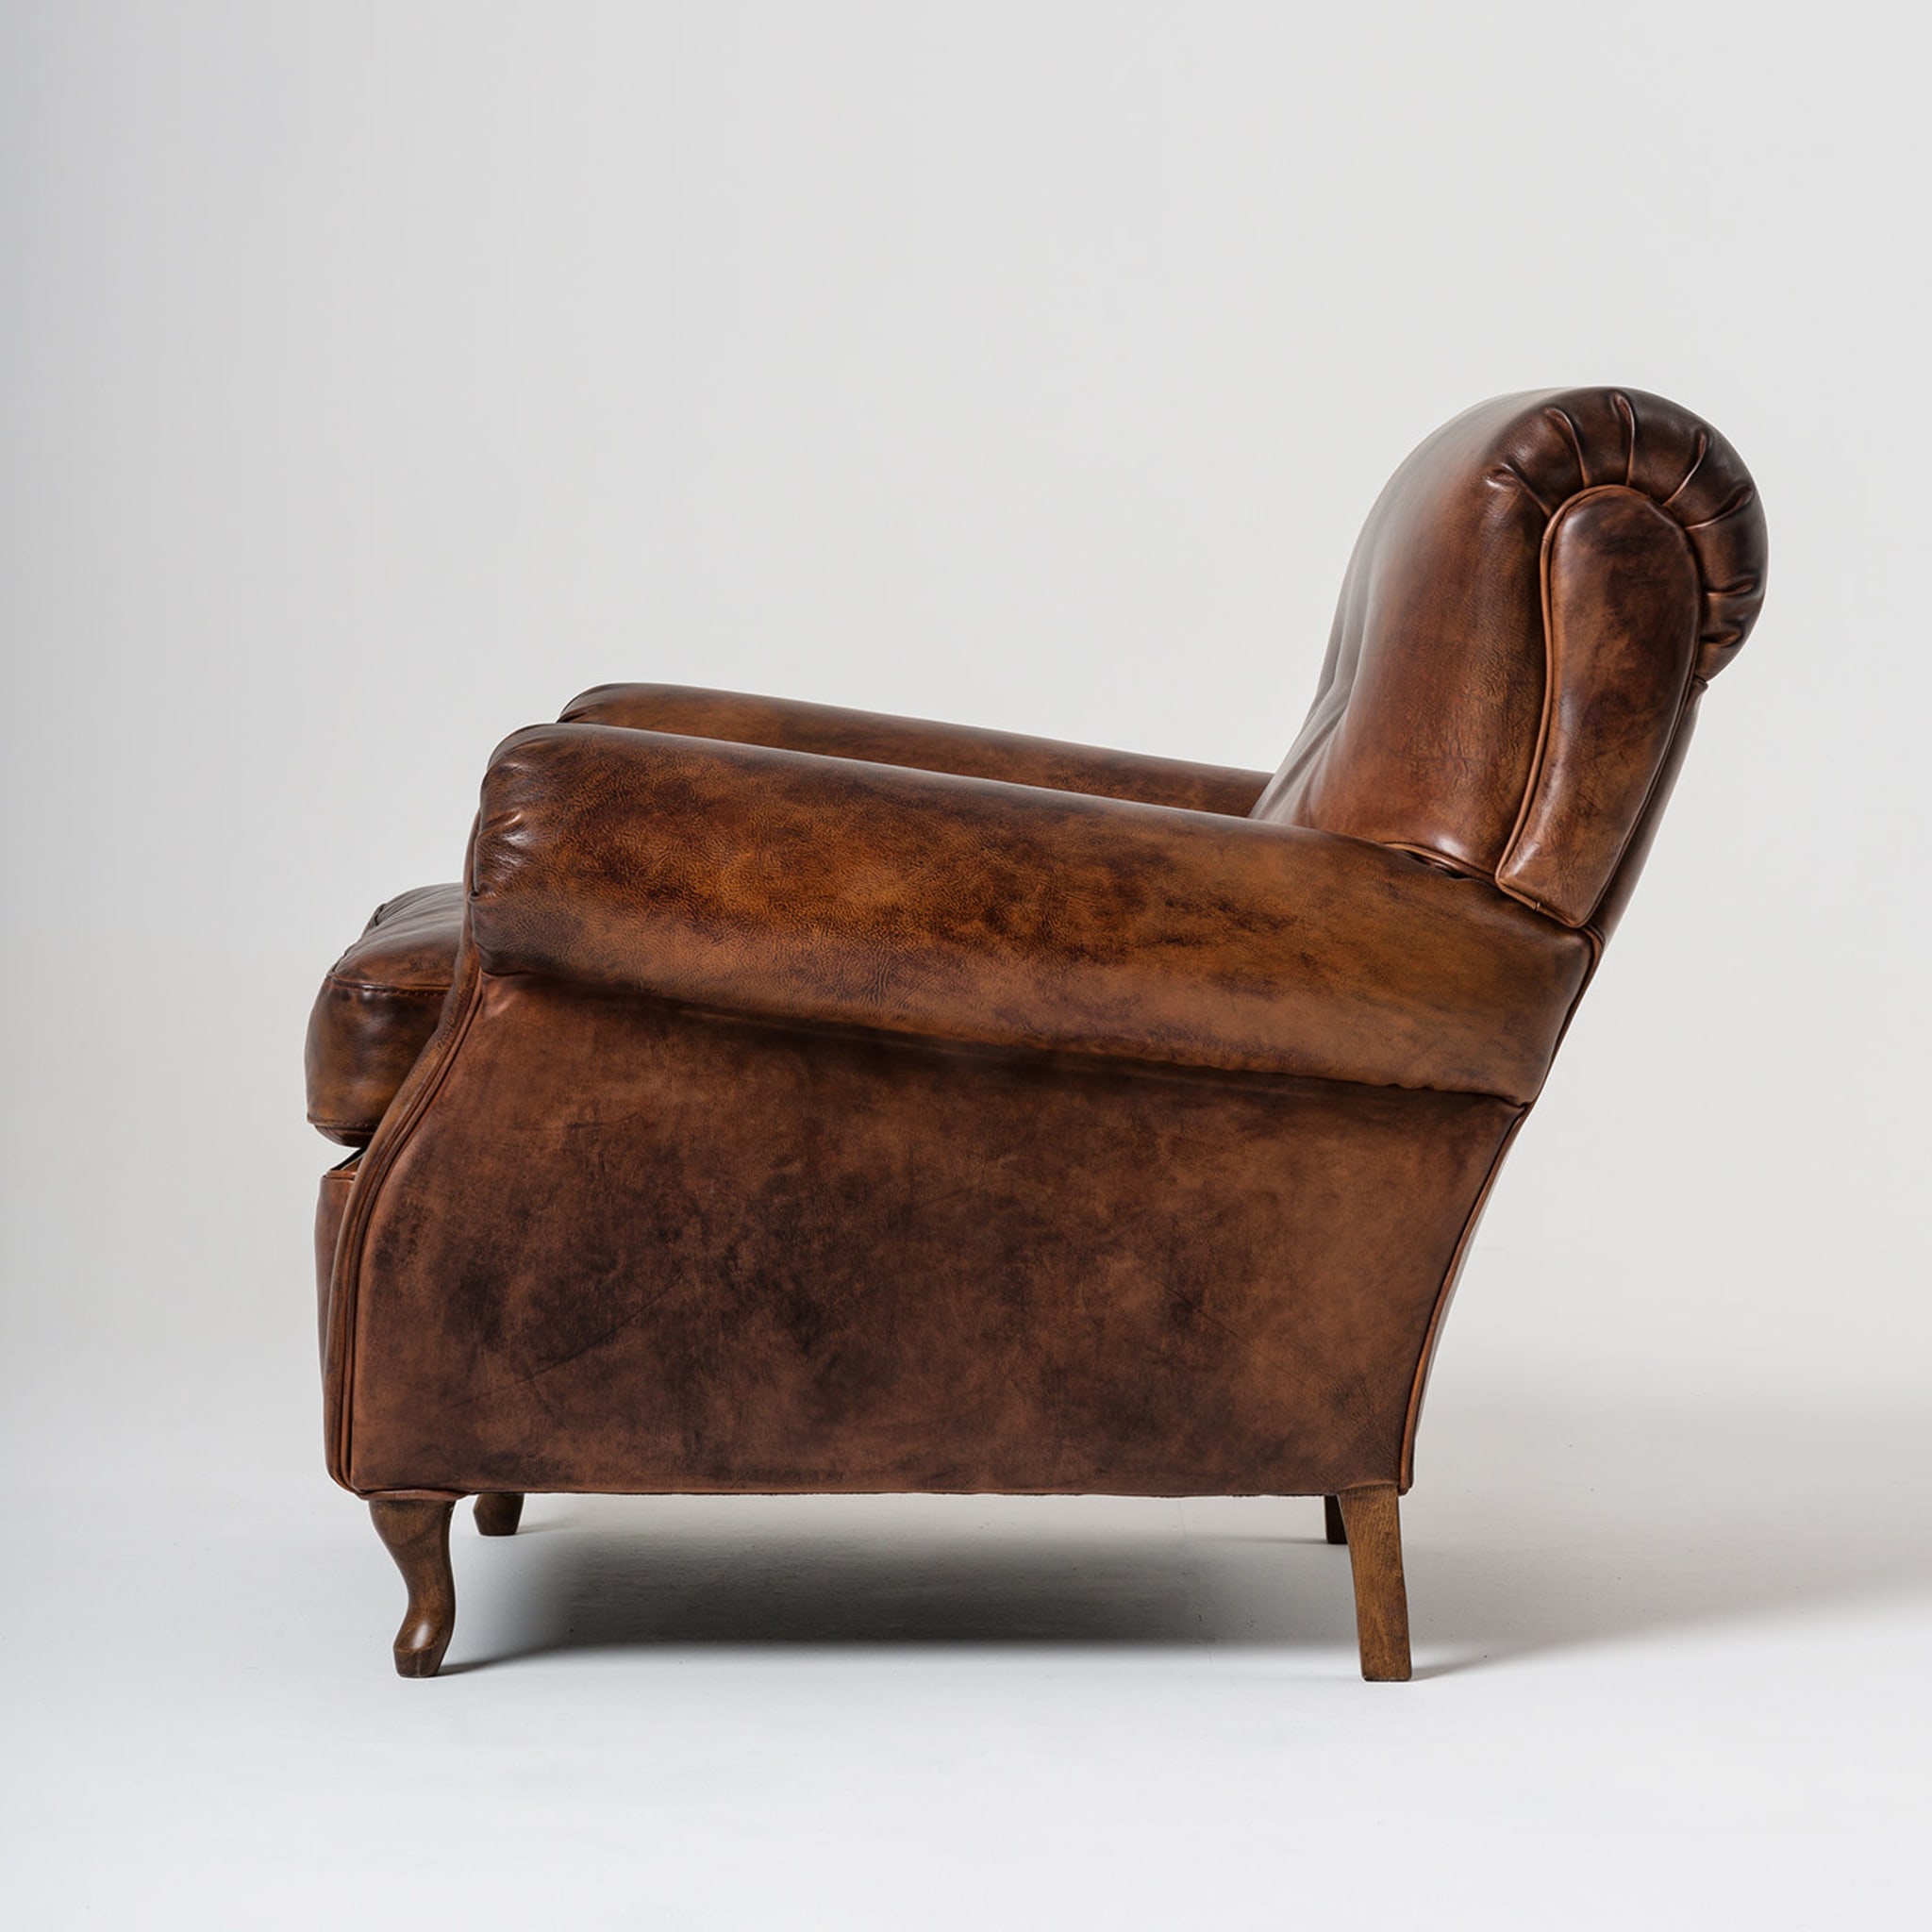 Roma armchair by Marco and Giulio Mantellassi - Alternative view 1